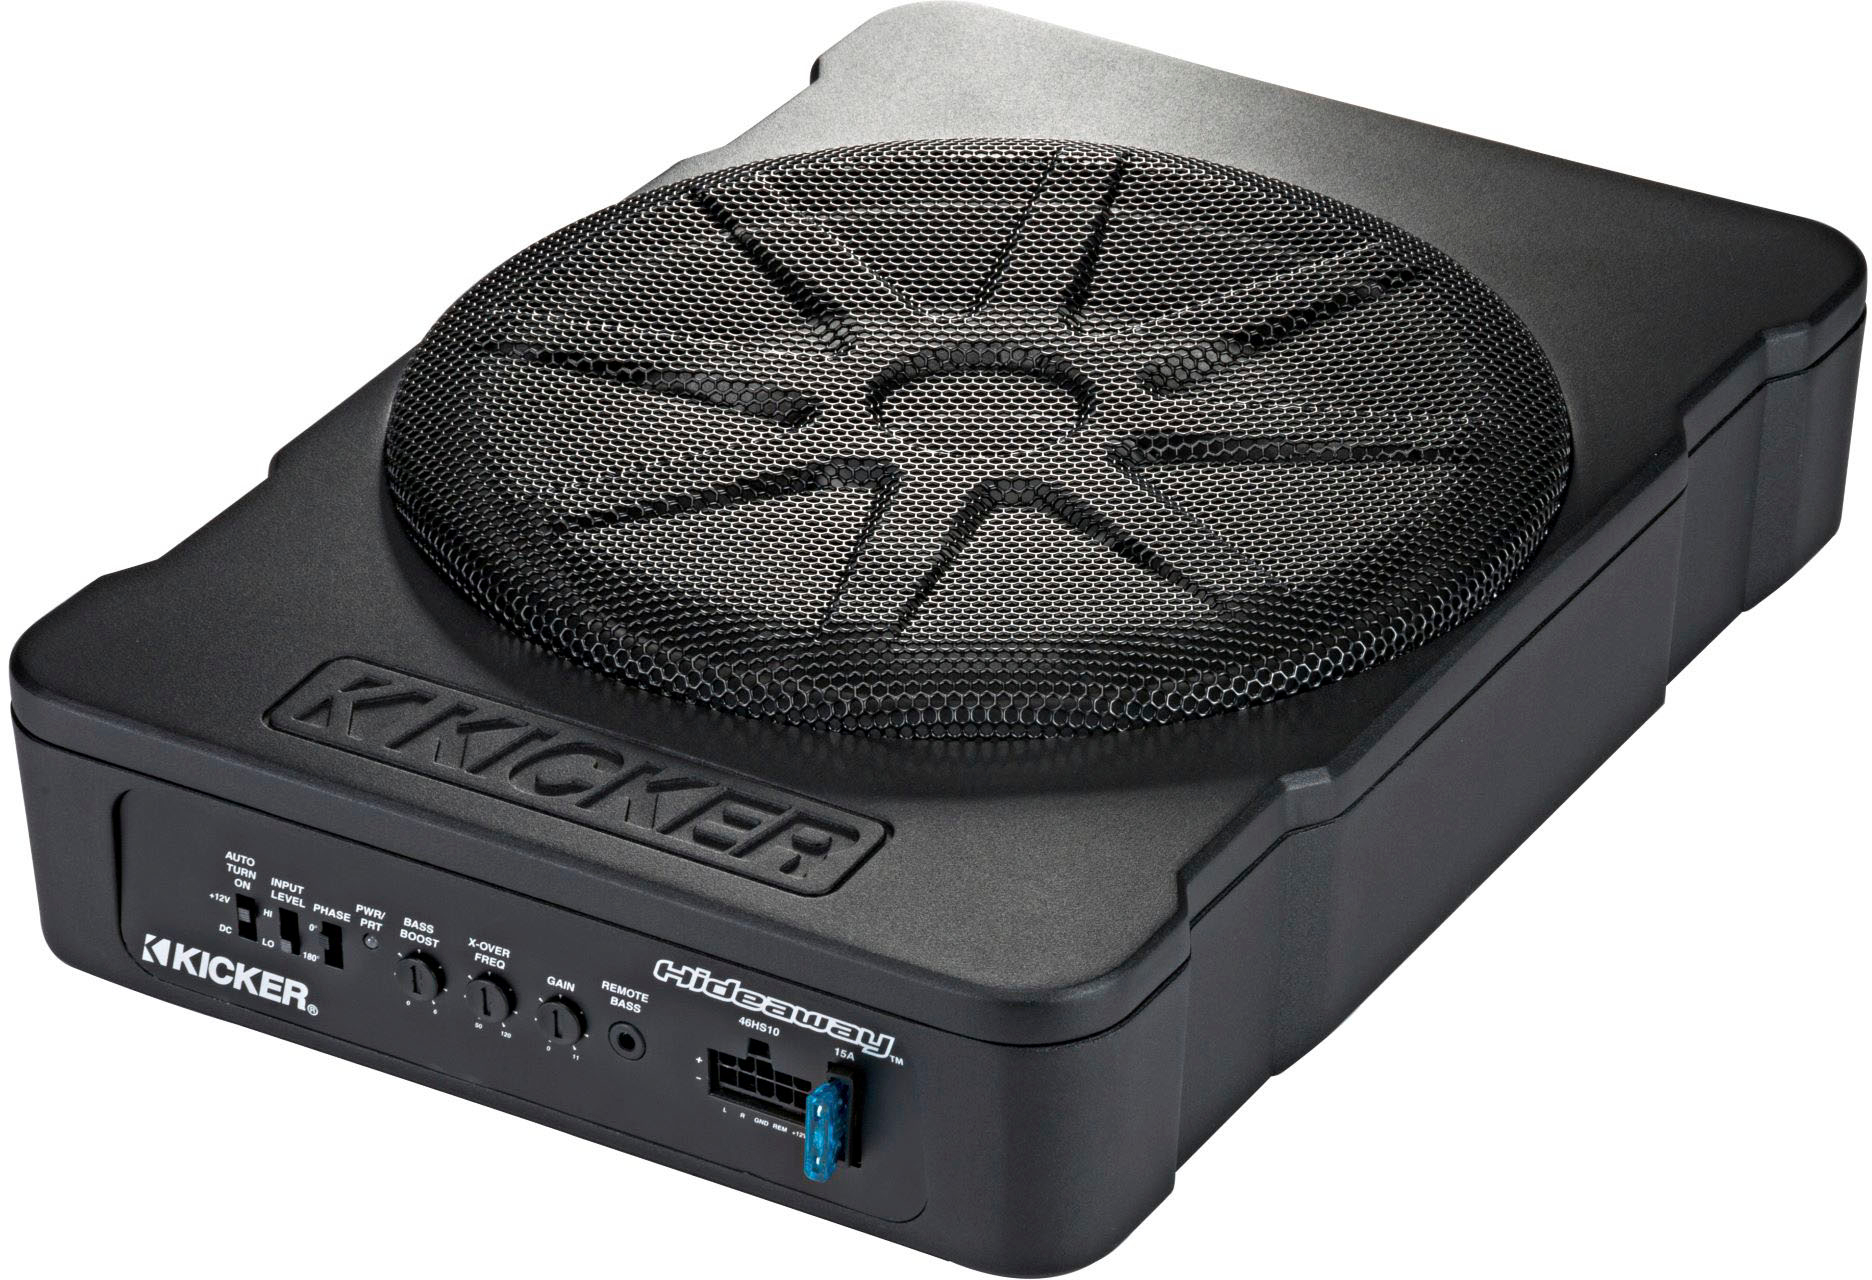 Angle View: KICKER - Hideaway 10" Compact Powered Subwoofer - Black